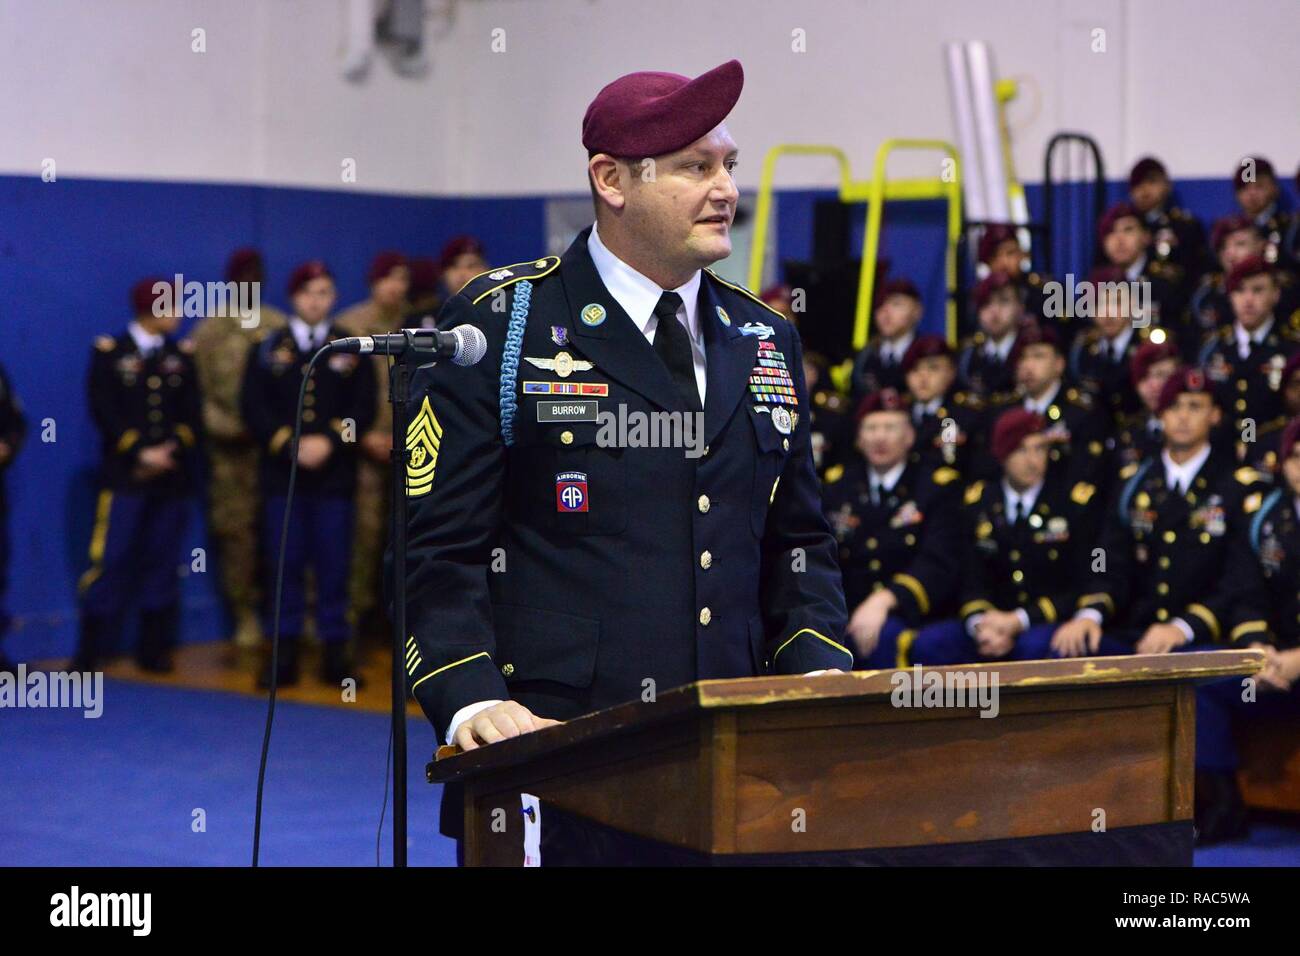 Outgoing Command Sgt. Maj. Charles L. Burrow, of 1st Battalion, 503rd Infantry Regiment, 173rd Airborne Brigade, gives a speech, January 12 2017, during a change of responsibility ceremony at Caserma Ederle, Vicenza, Italy, Jan. 12, 2017. The 173rd Airborne Brigade based in Vicenza, Italy, is the Army Contingency Response Force in Europe, and is capable of projecting forces to conduct the full of range of military operations across the United State European, Central and Africa Commands areas of responsibility. Stock Photo